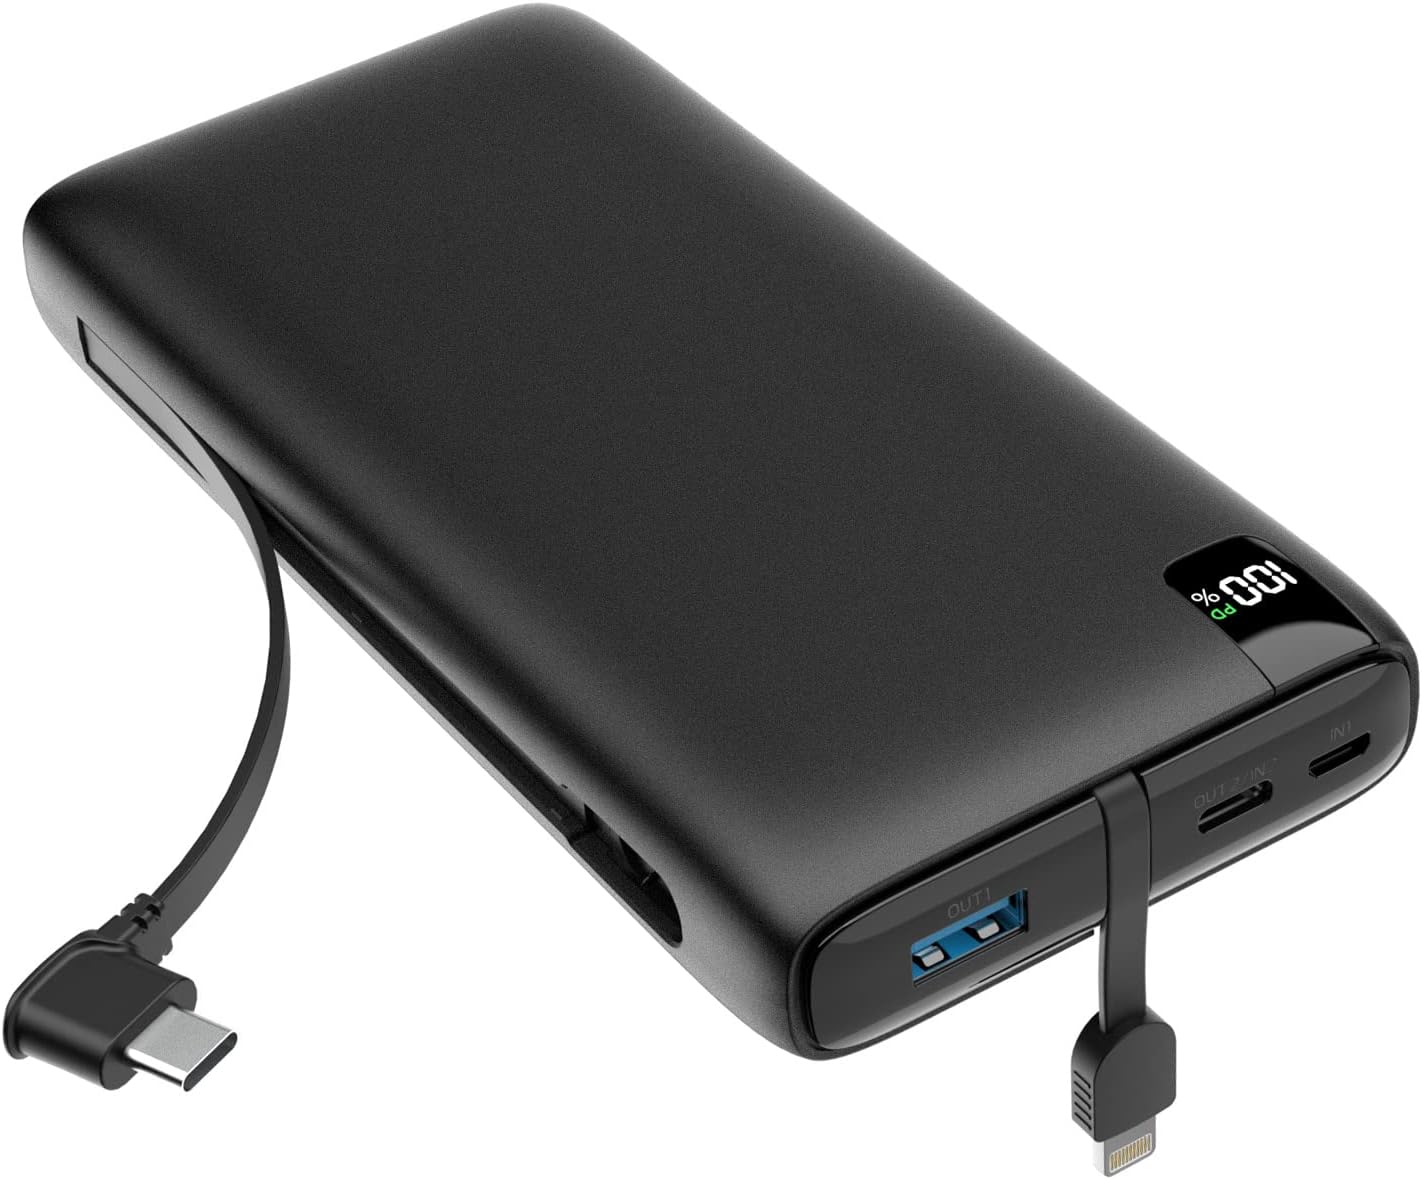 Power Bank 26800mAh Portable Charger with 4 Outputs - Black